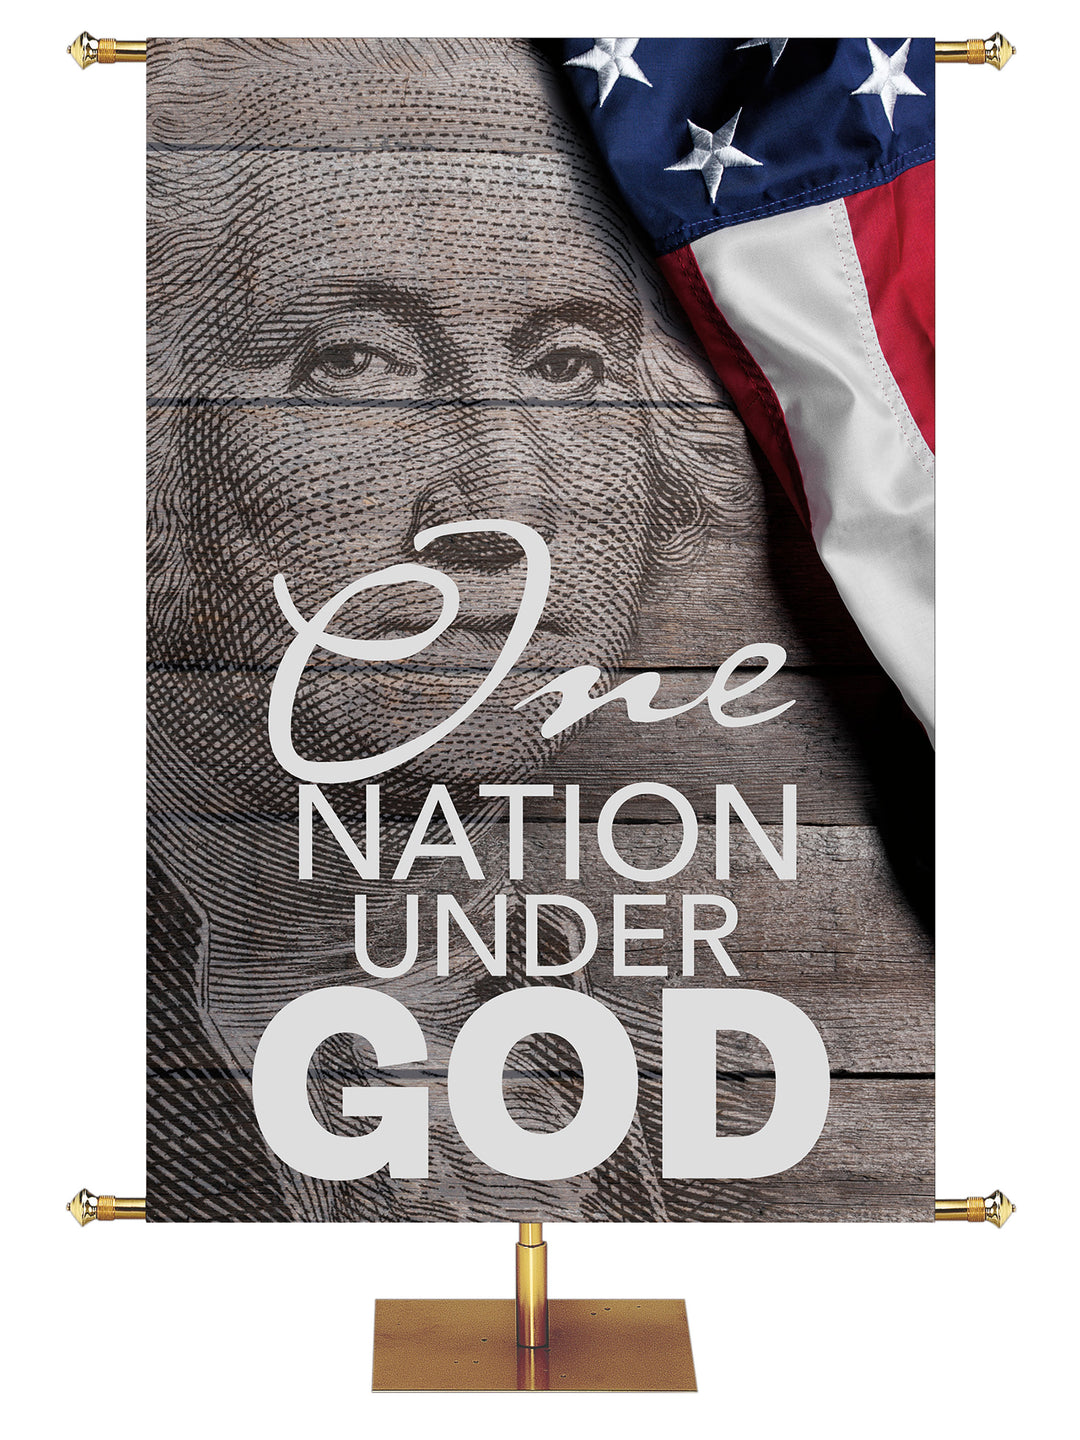 Patriotic Banner featuring the illustrated face of George Washington and U.S. Flag displayed on distressed wood planks with quote One Nation Under God.